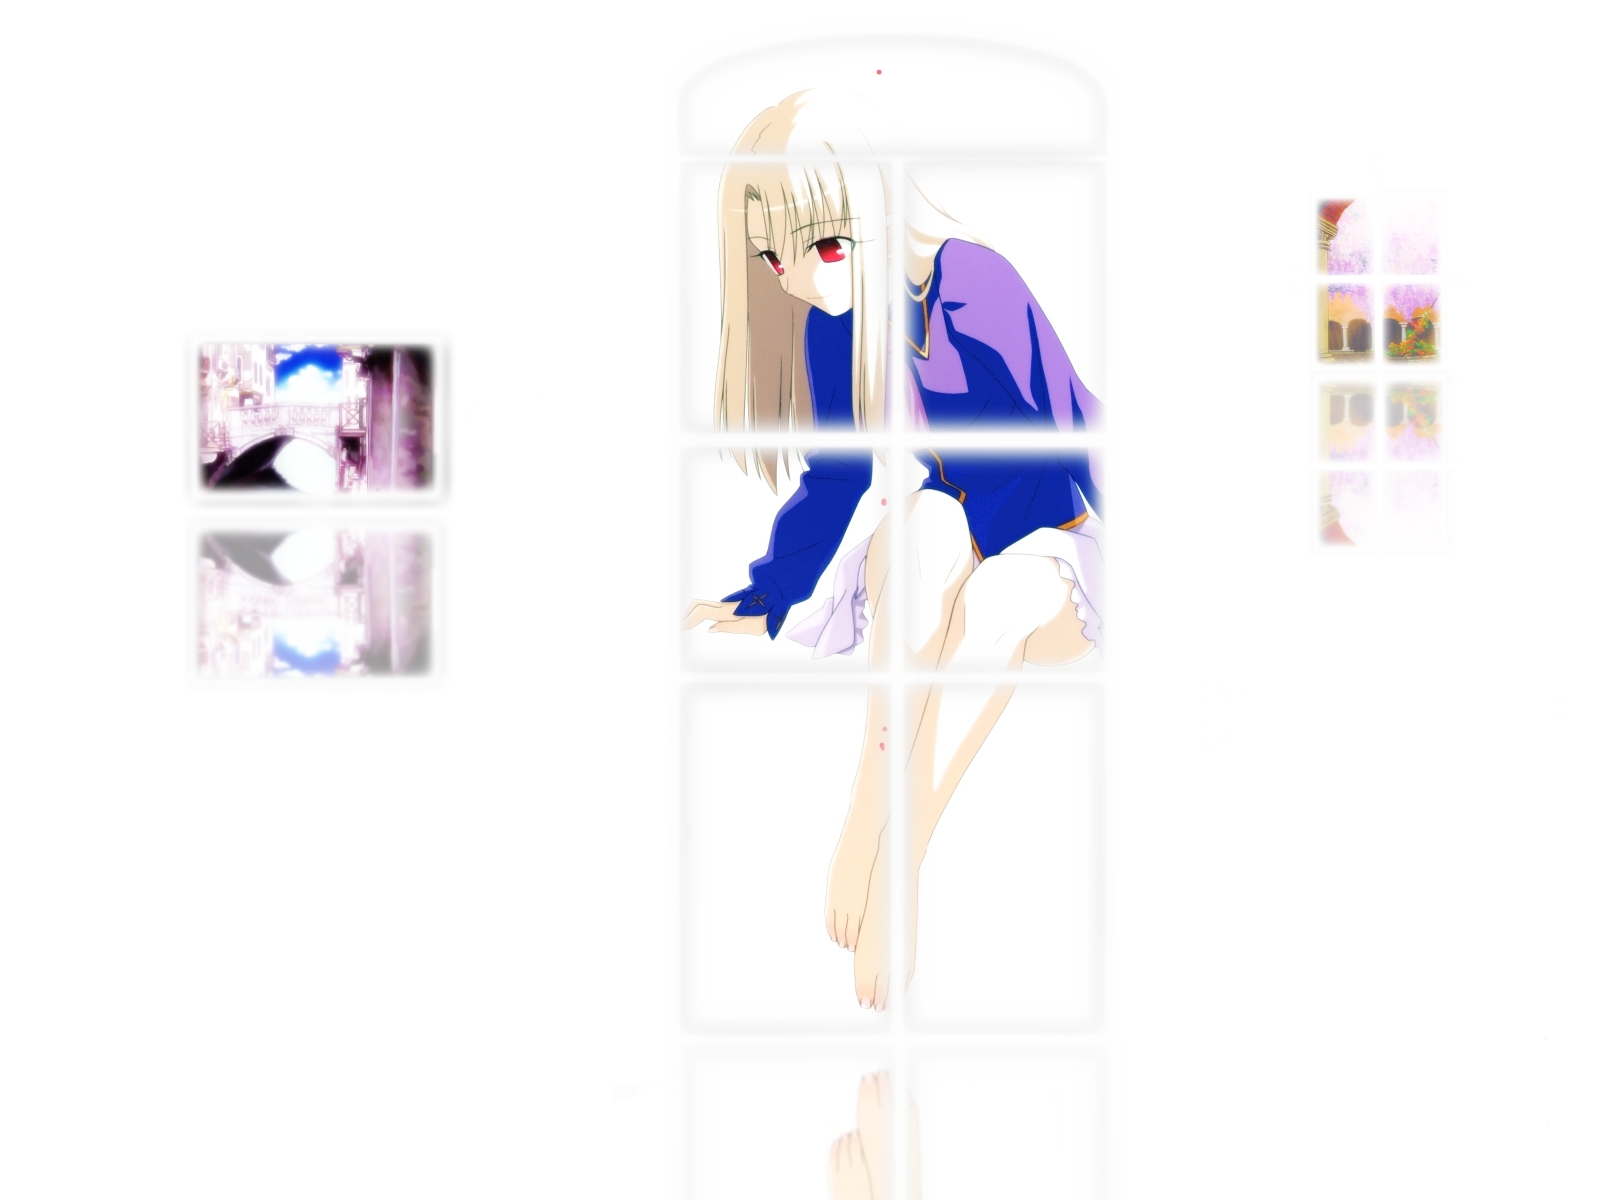 Illyasviel Von Einzbern from Fate/Stay Night - a captivating anime character.